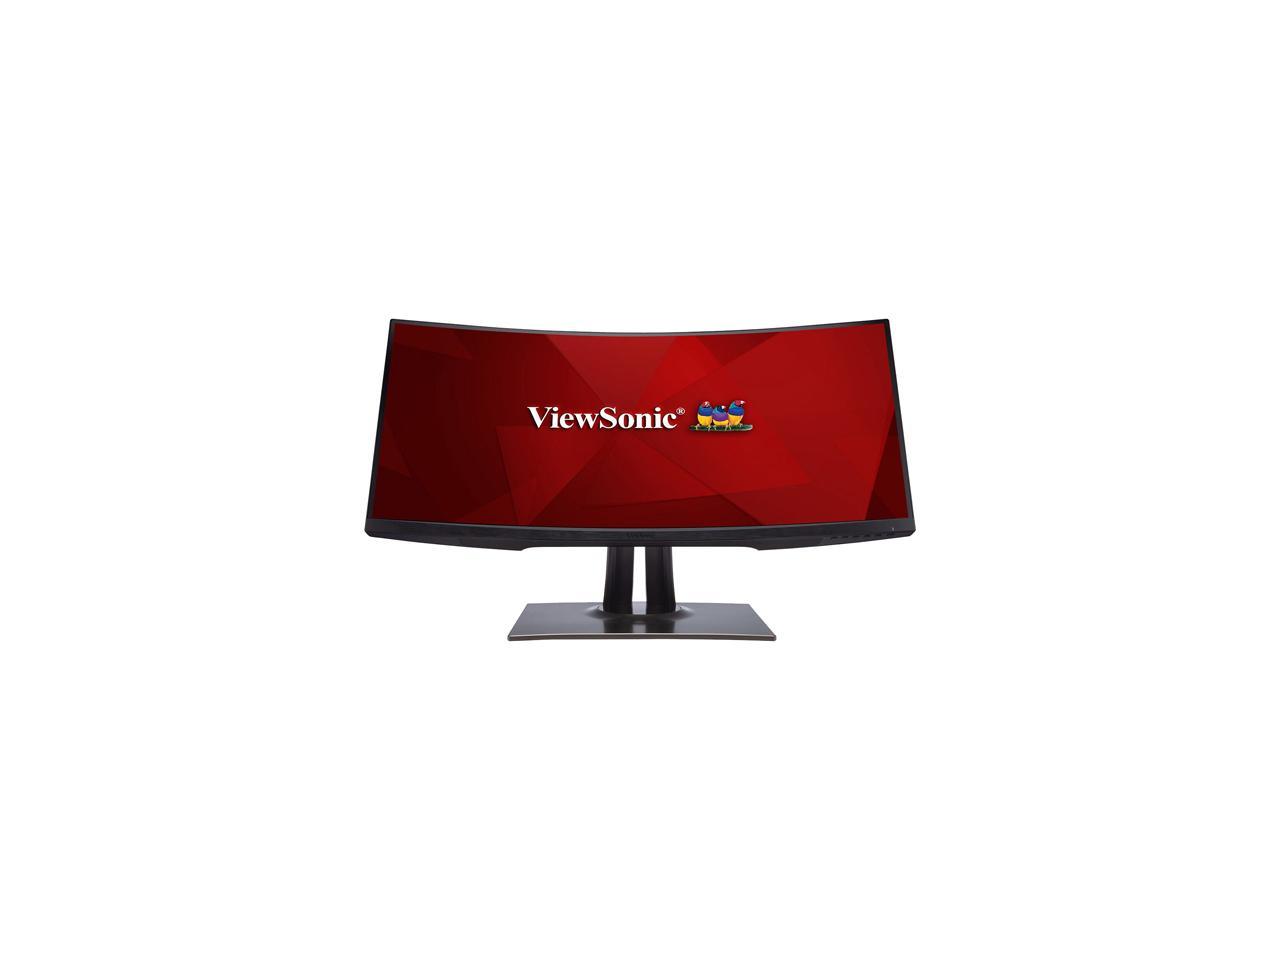 ViewSonic VP3481 34" WQHD 3440 x 1440 100Hz 5ms DisplayPort 2xHDMI USB 3.1 Type-C USB 3.1 Hub HDR10 14-bit 3D LUT and Color Calibration for Video and Graphics Anti-Glare Backlit LED Curved Monitor